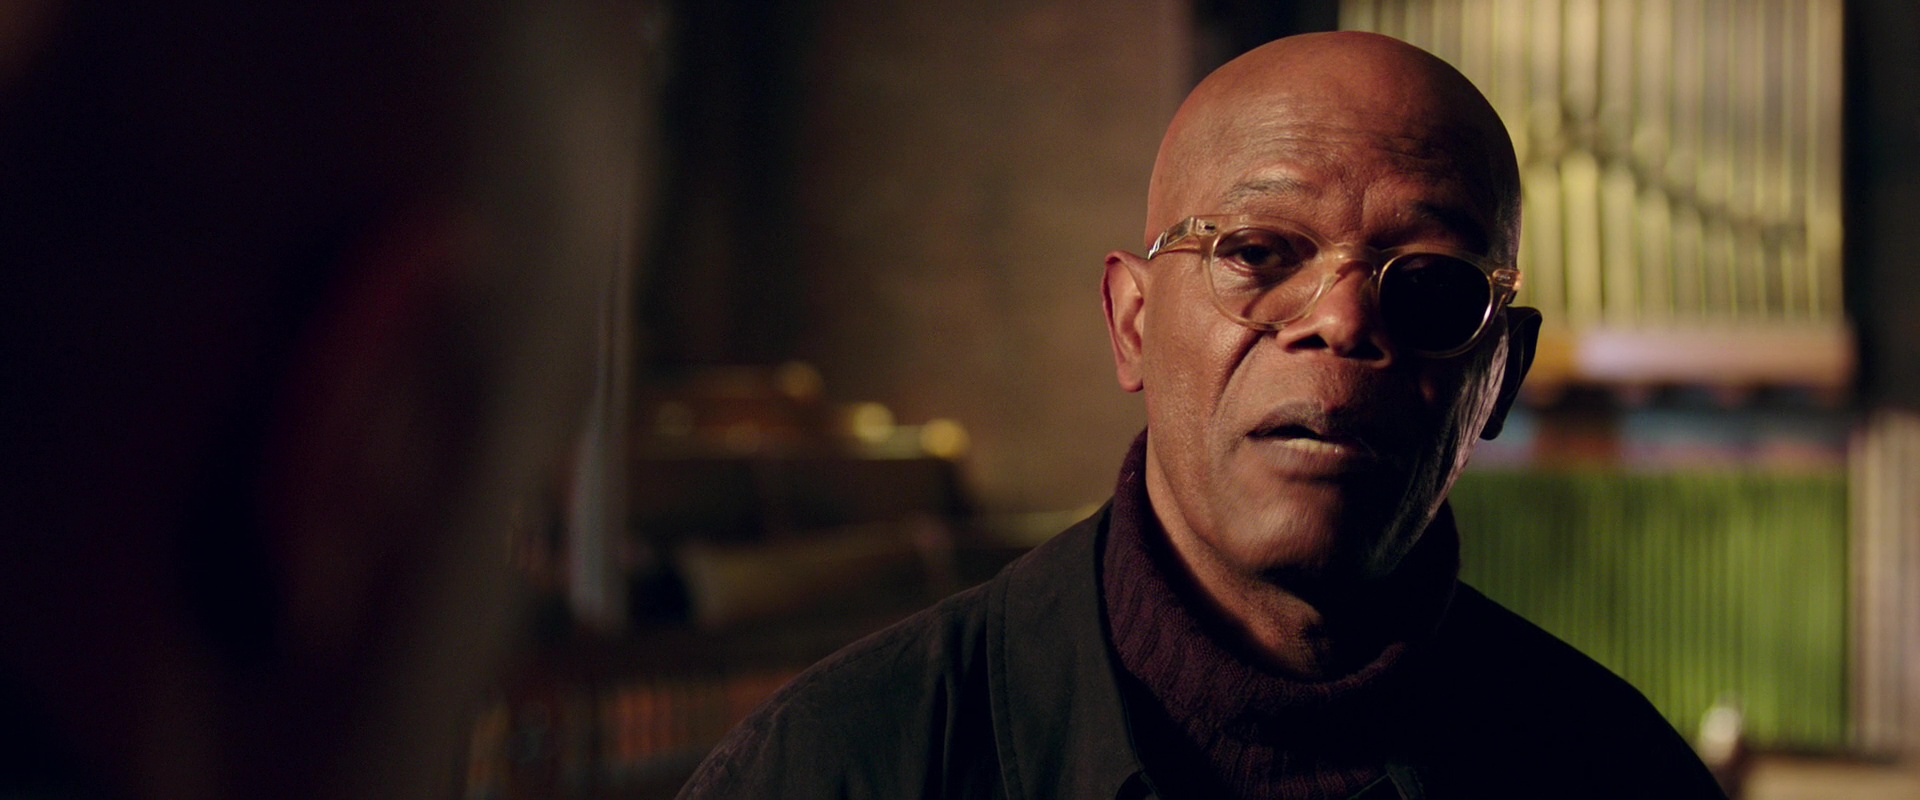 Old Focals Icon Sunglasses Worn by Samuel Leroy Jackson in xXx: Return of Xander Cage ...